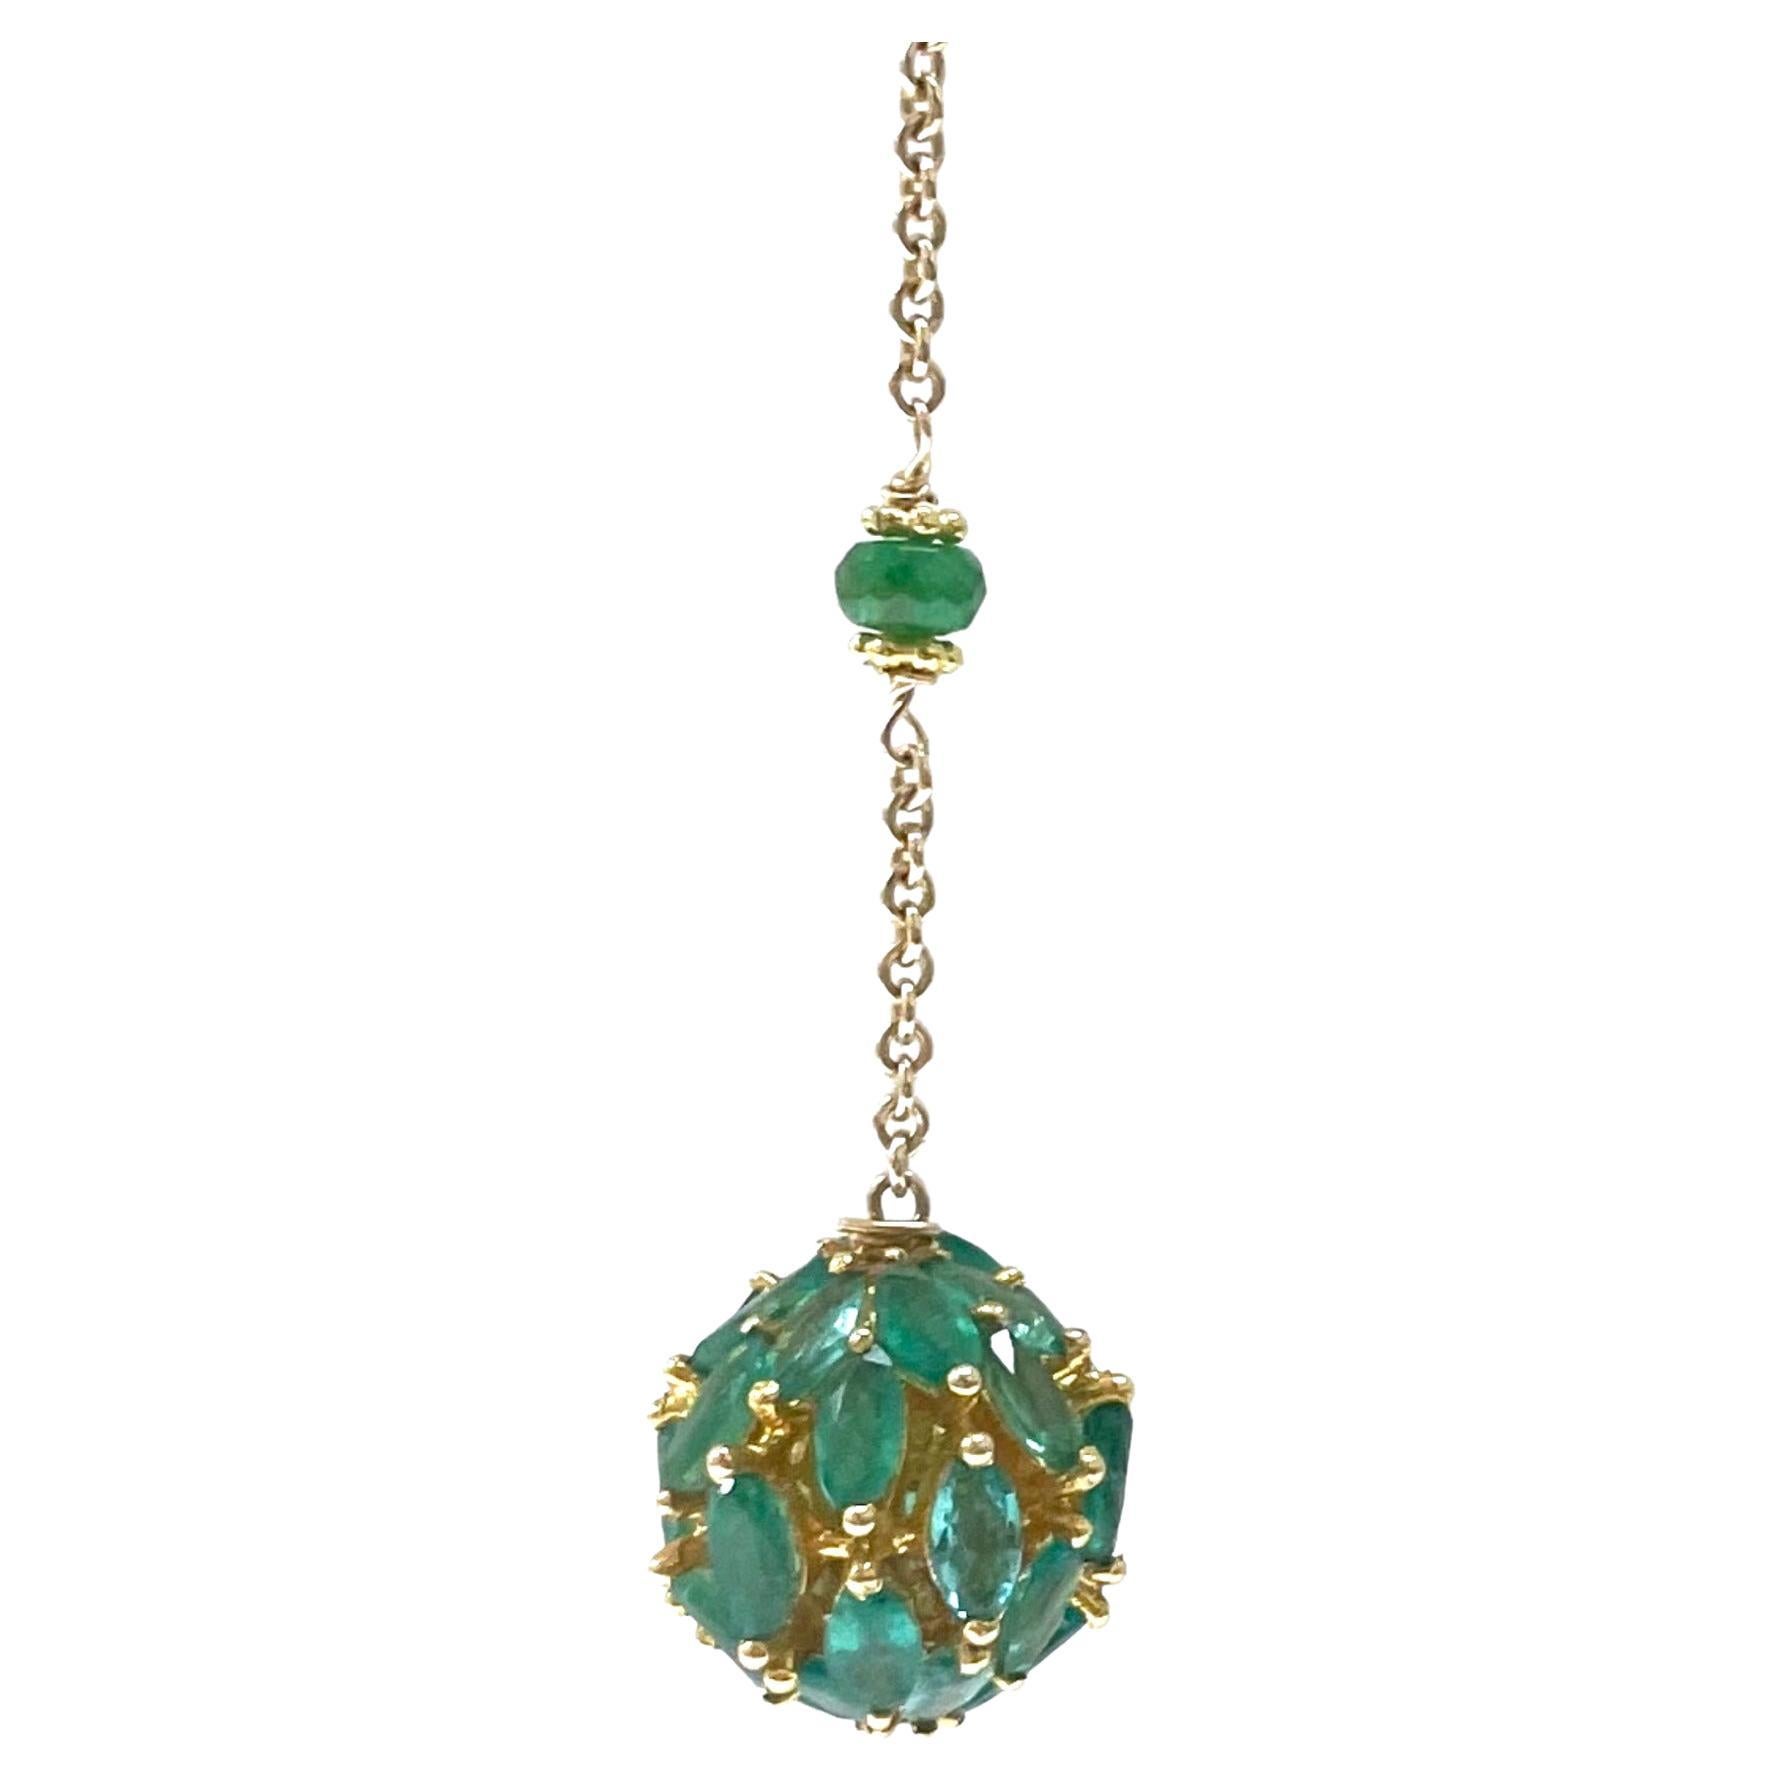 Description
Stunning and fashionable marquis set Emerald balls suspended from pave diamond stud and a chain accented with green Tsavorite. Item #E3354
Check out matching Necklace (see photo) Item # N3747, $4,150.

Materials and Weight
Emeralds 5